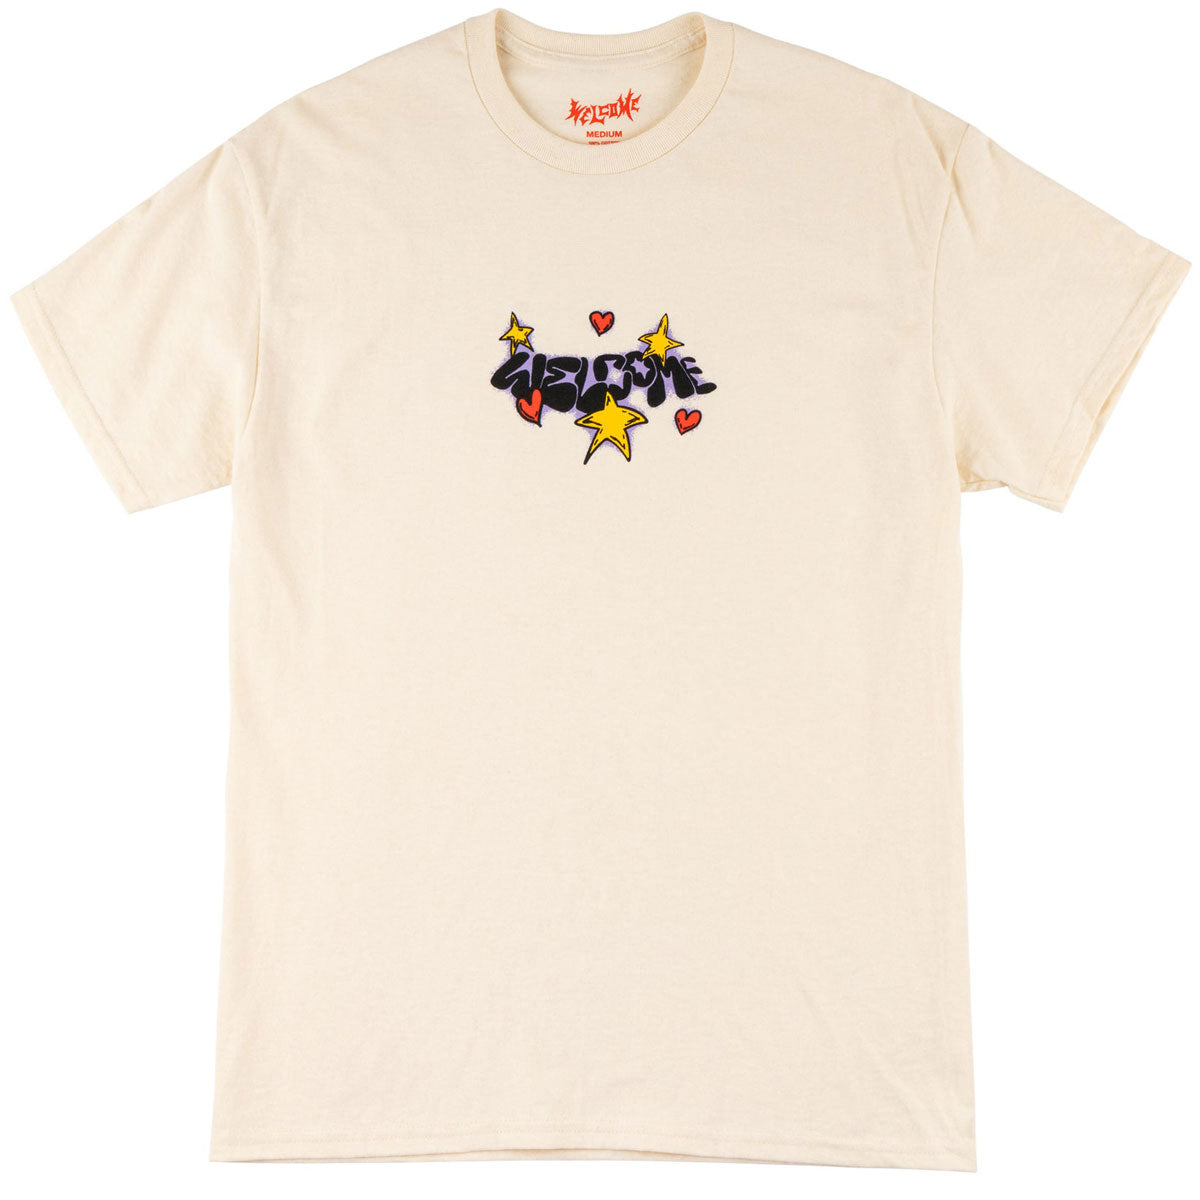 Welcome Candy T-Shirt - Bone image 1